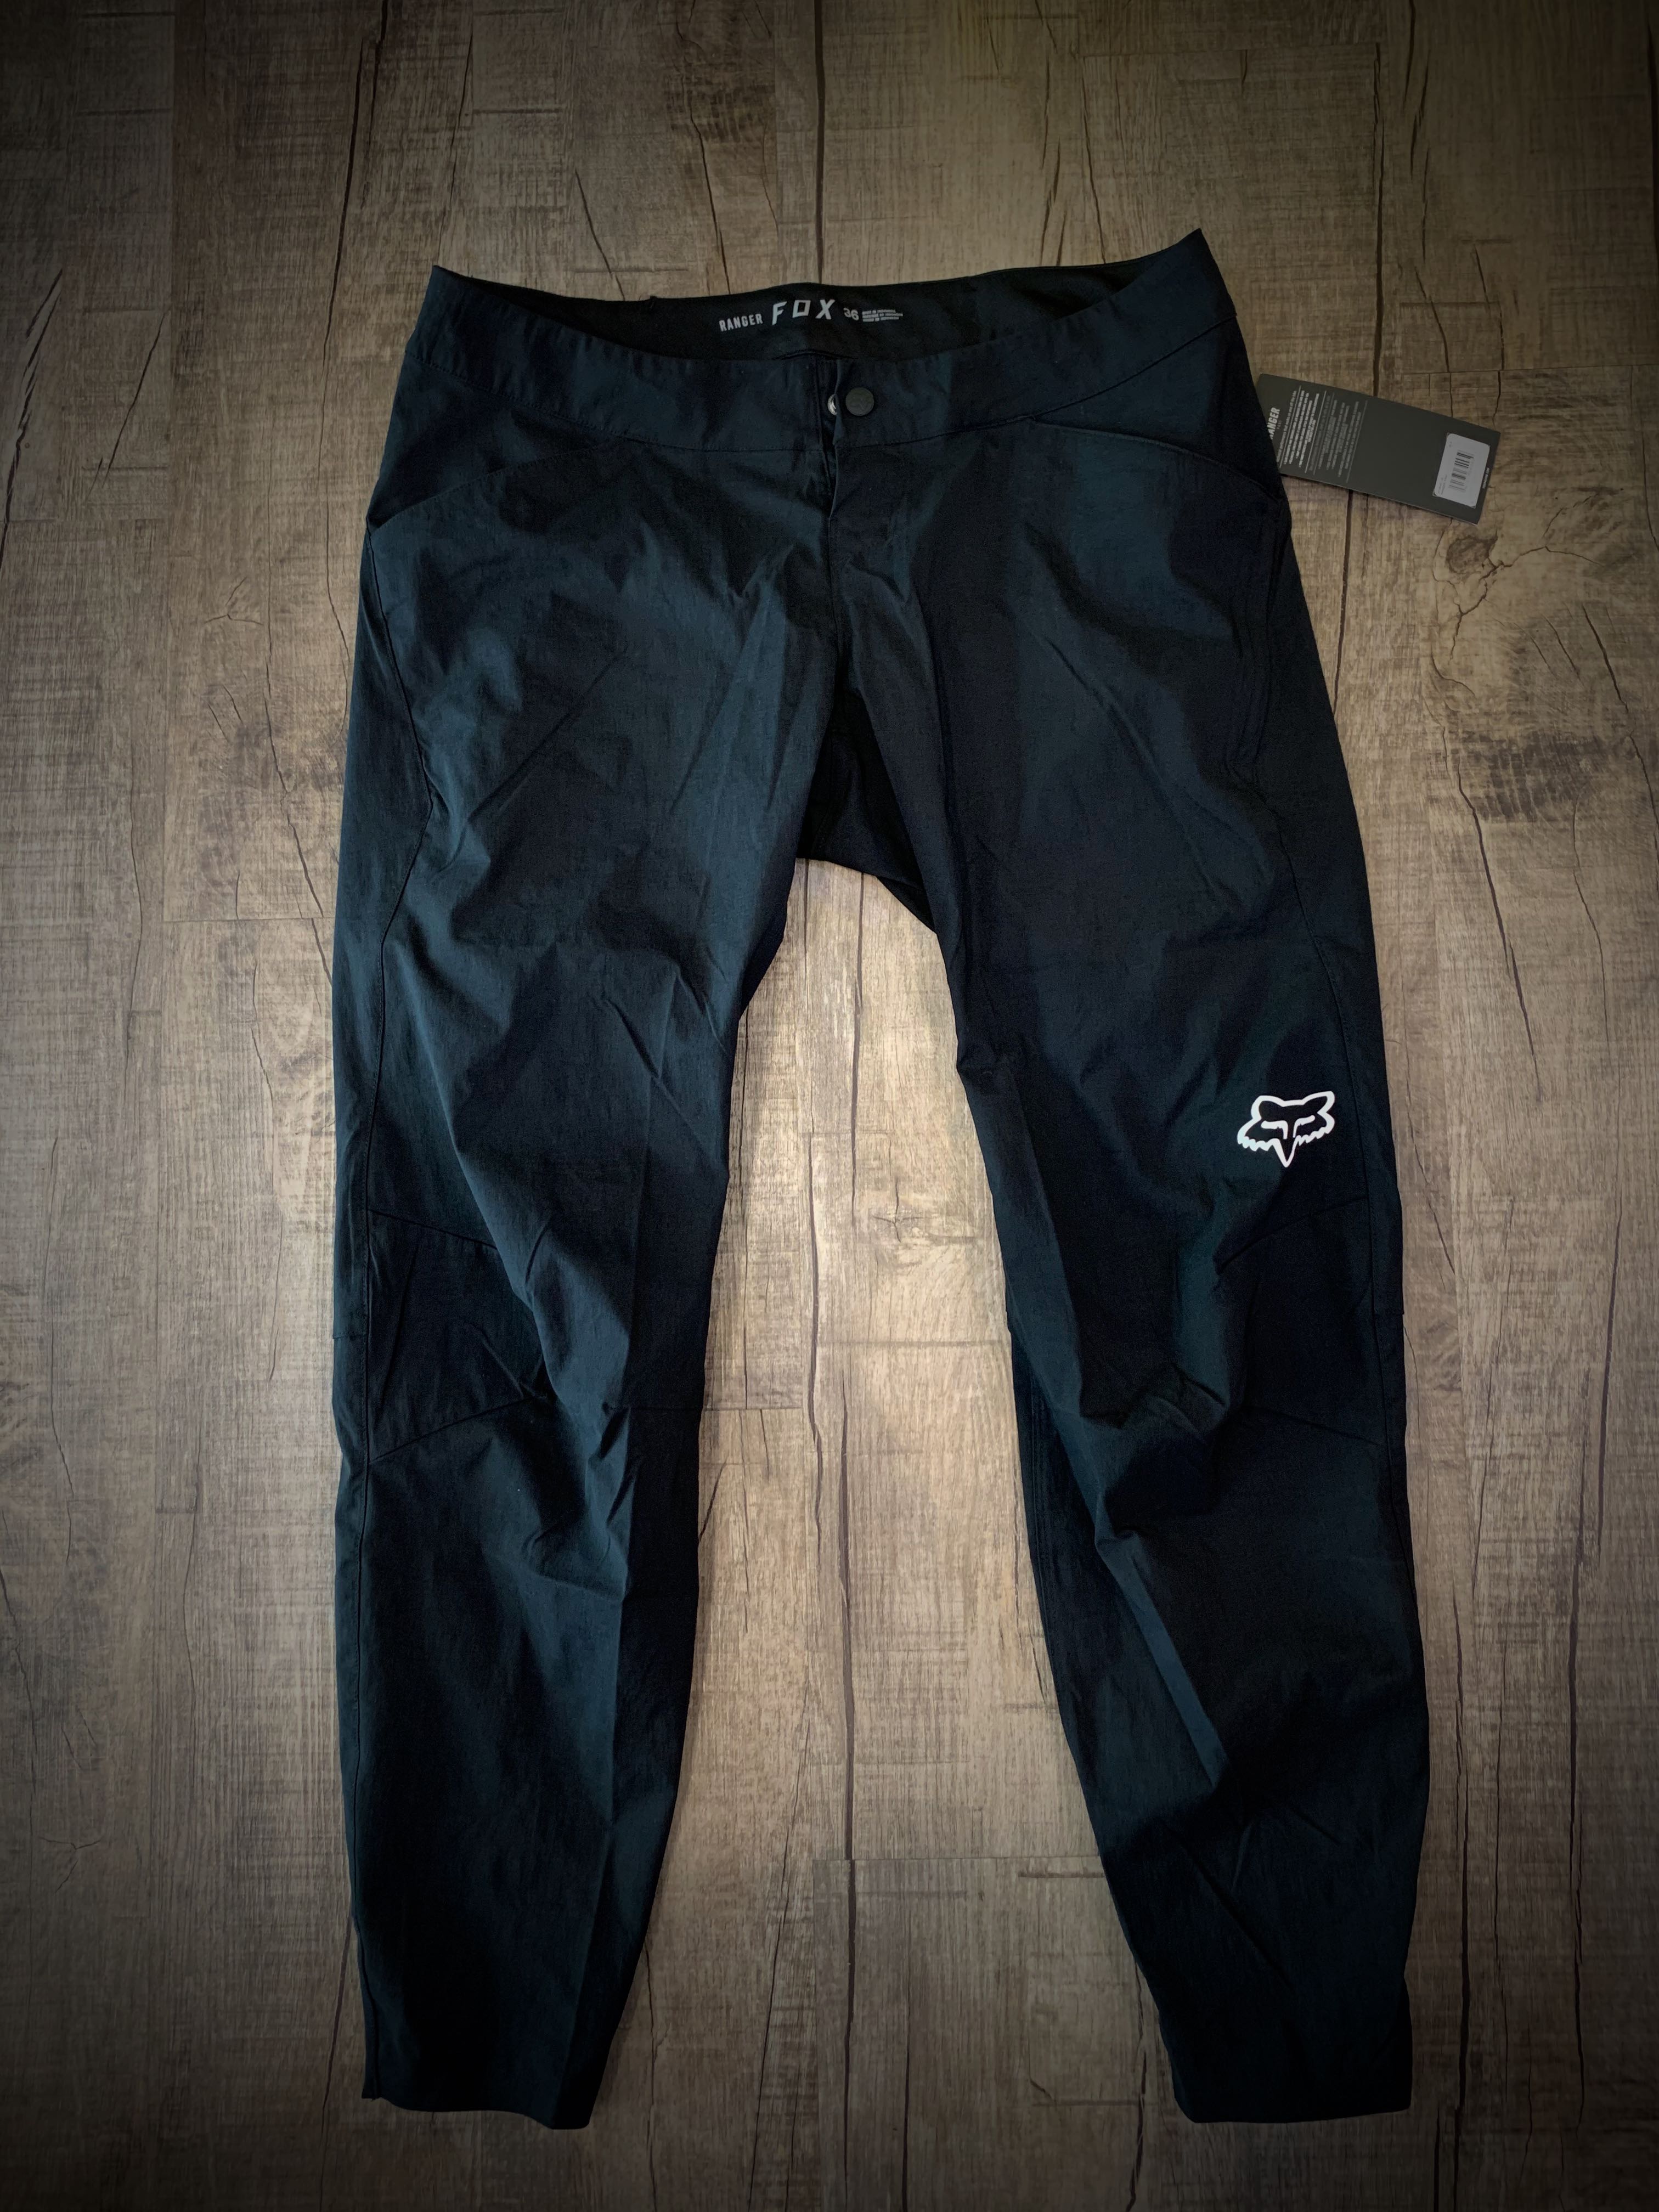 Tested : Pete's Fox Racing Ranger Pants Review.